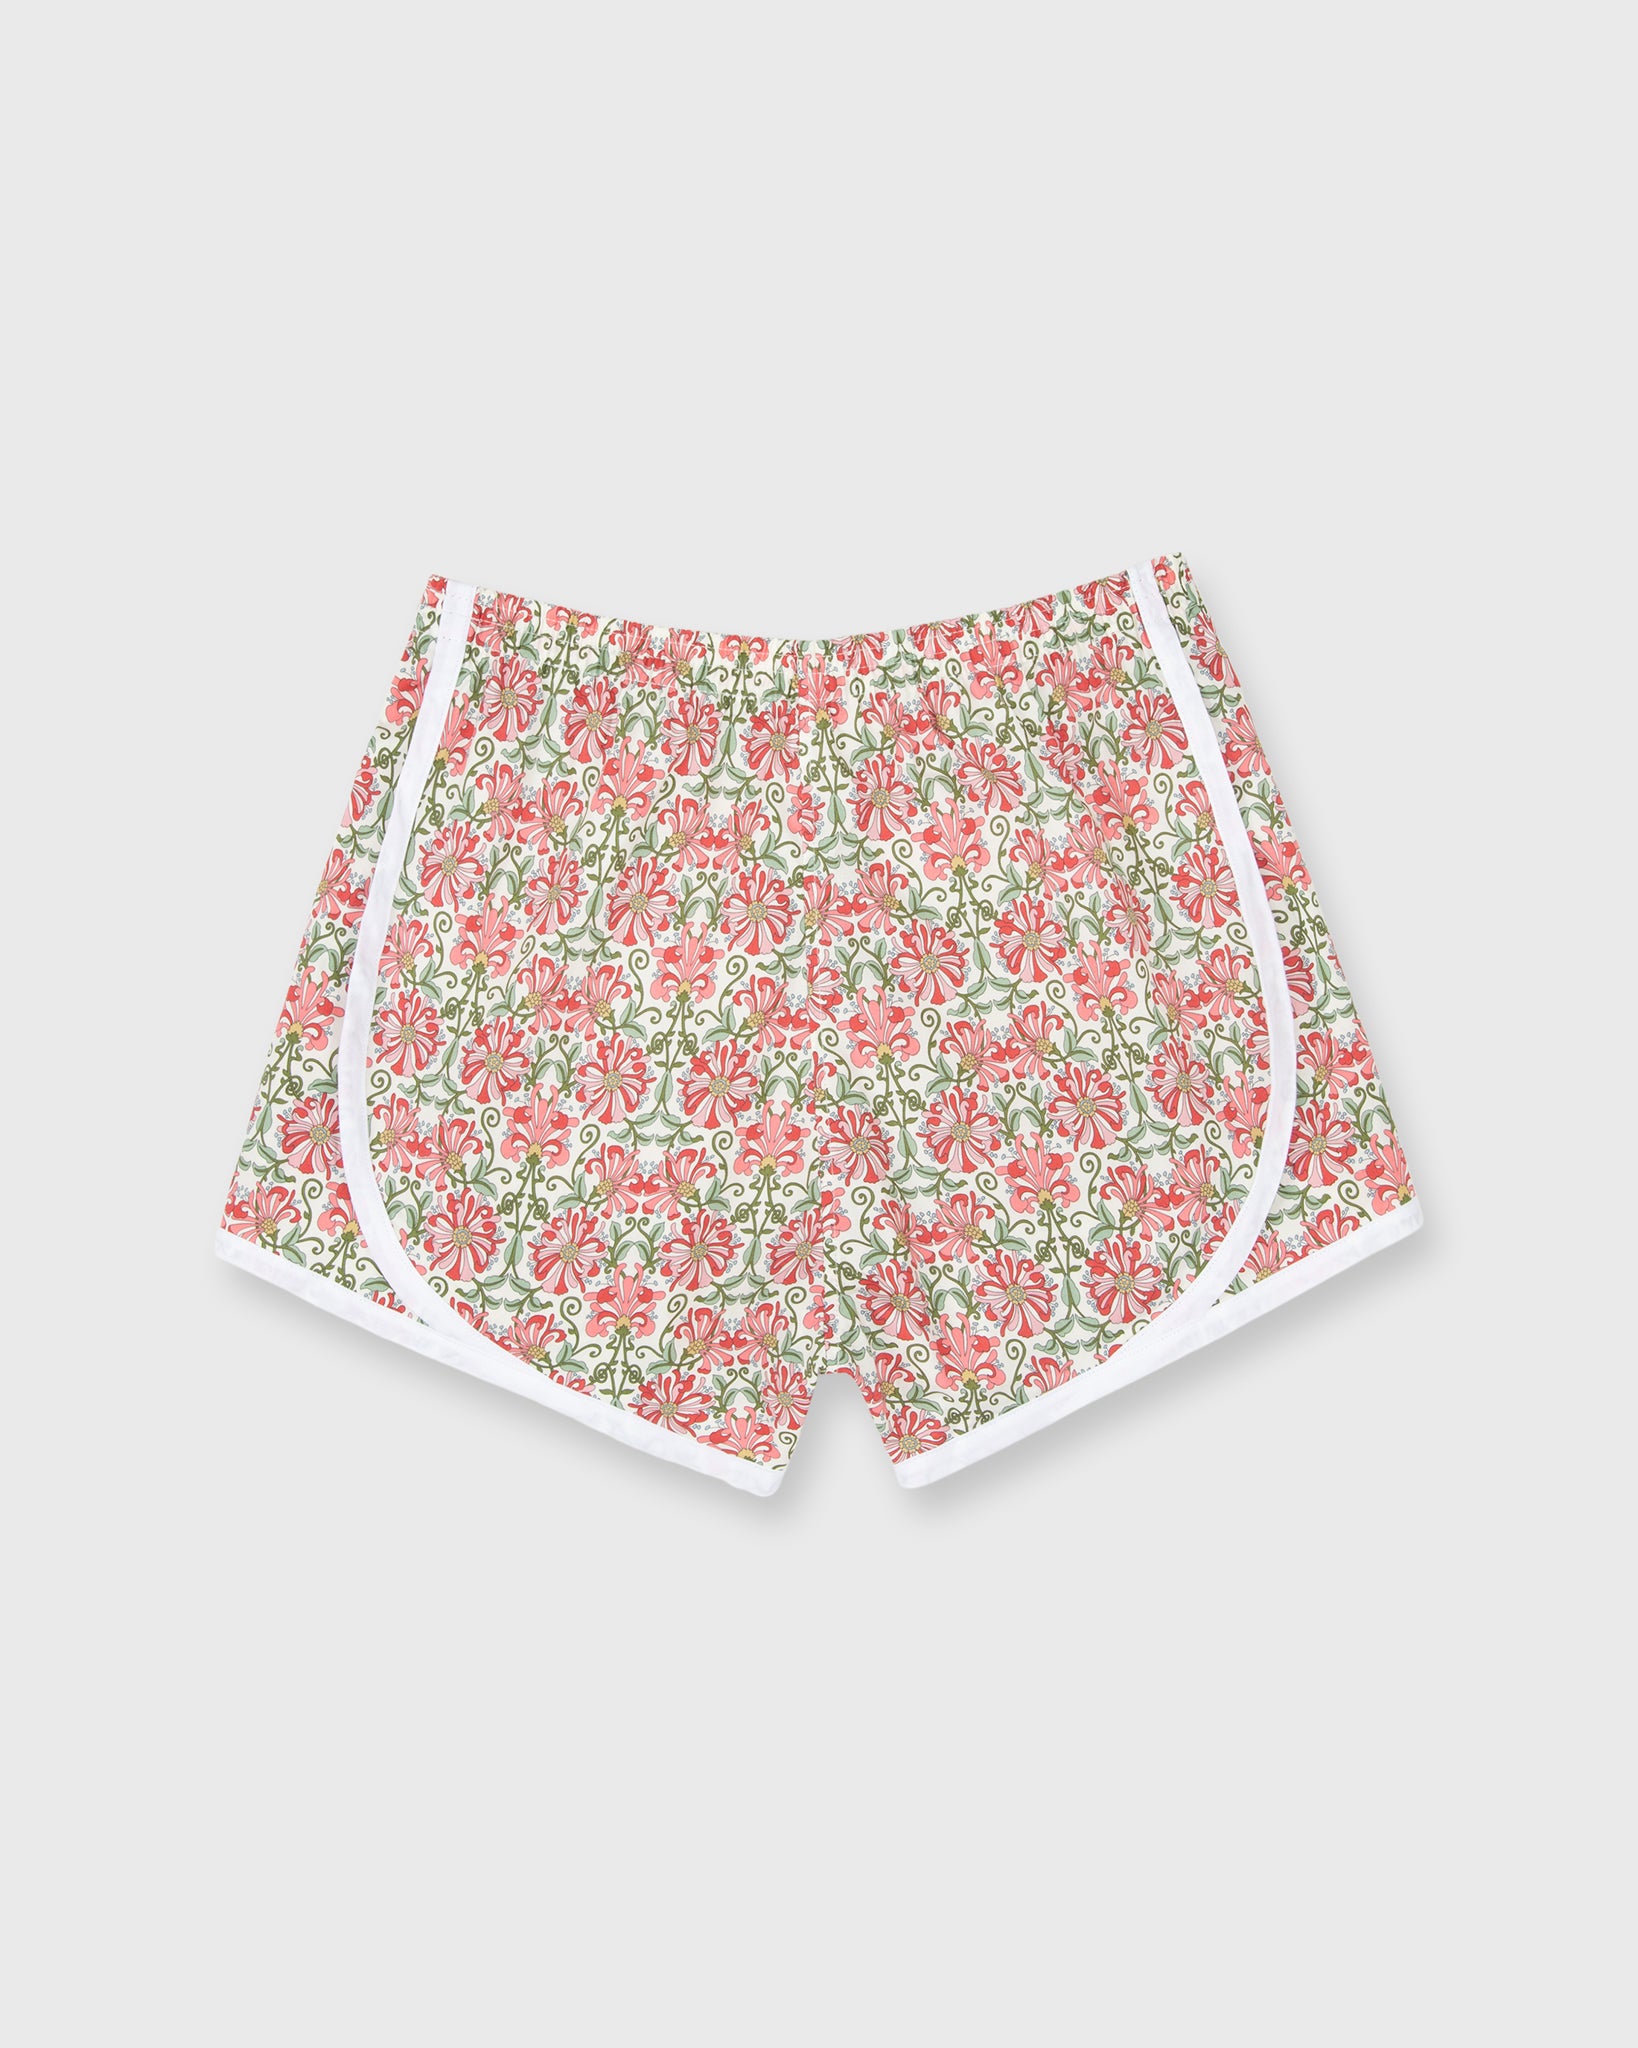 Track Short in Pink/Red Honeysuckle Liberty Fabric